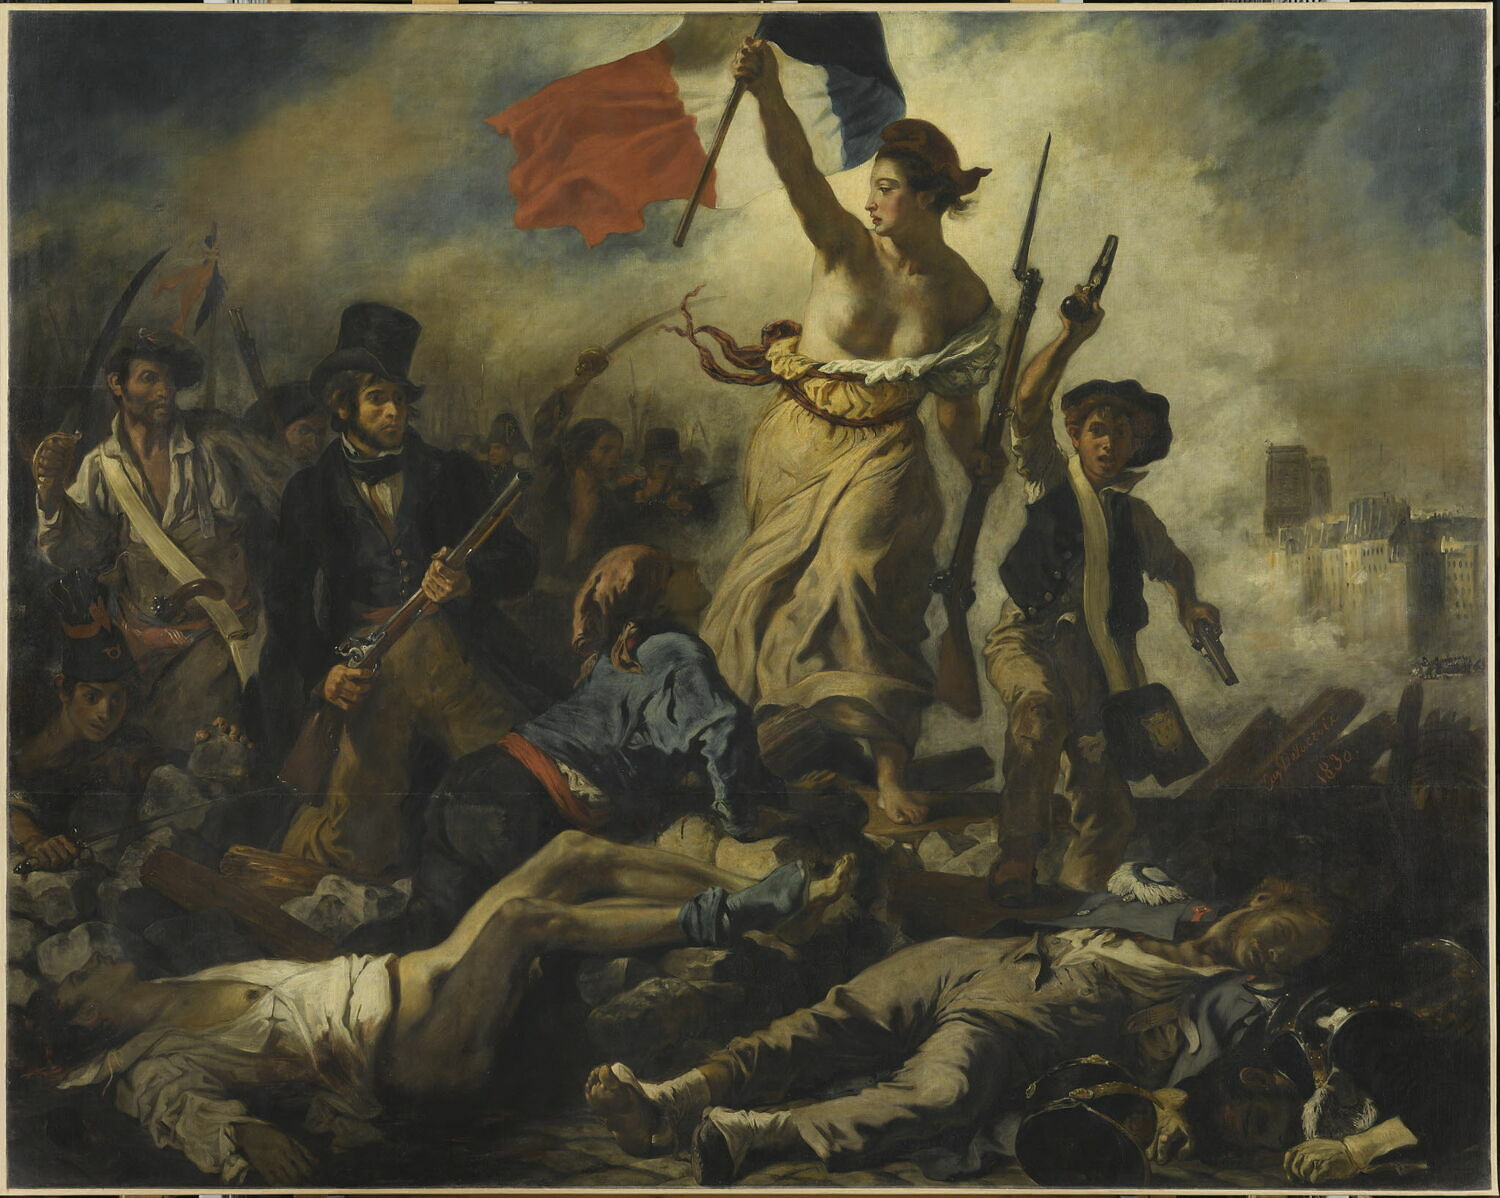 A painting of Marianne (Lady Liberty) leading the French people in revolution.